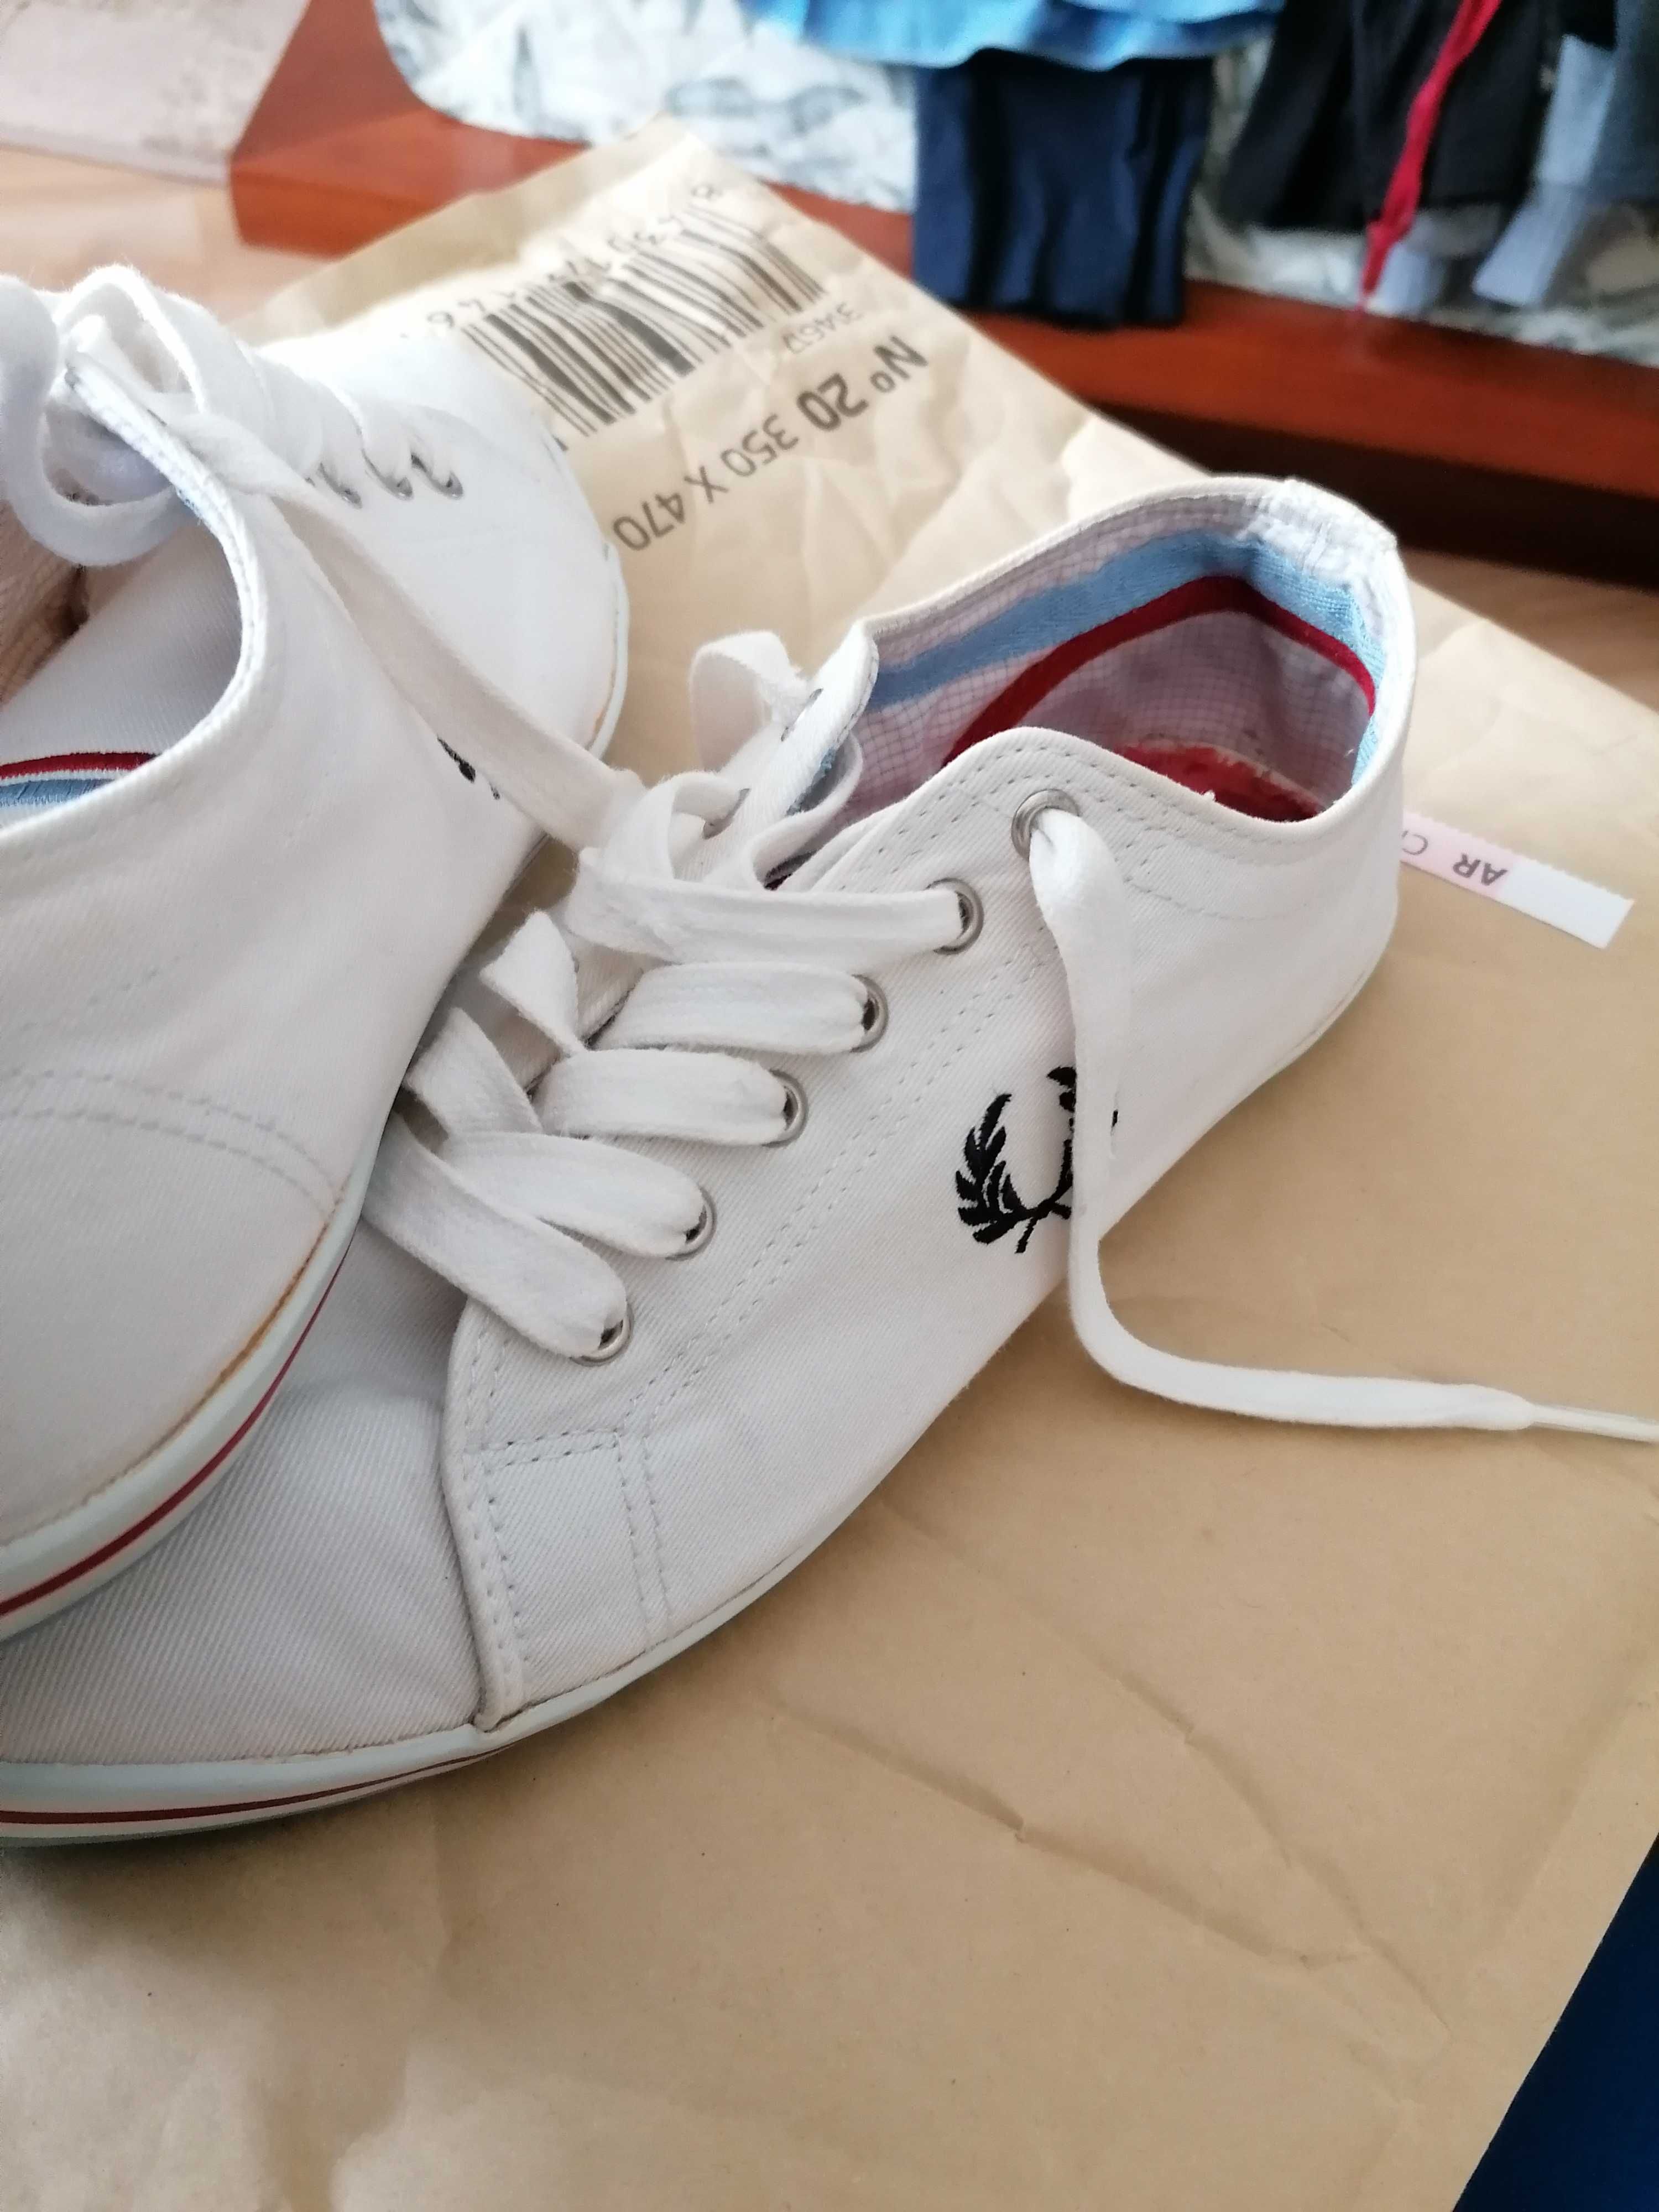 Sapatilhas fred perry t 40